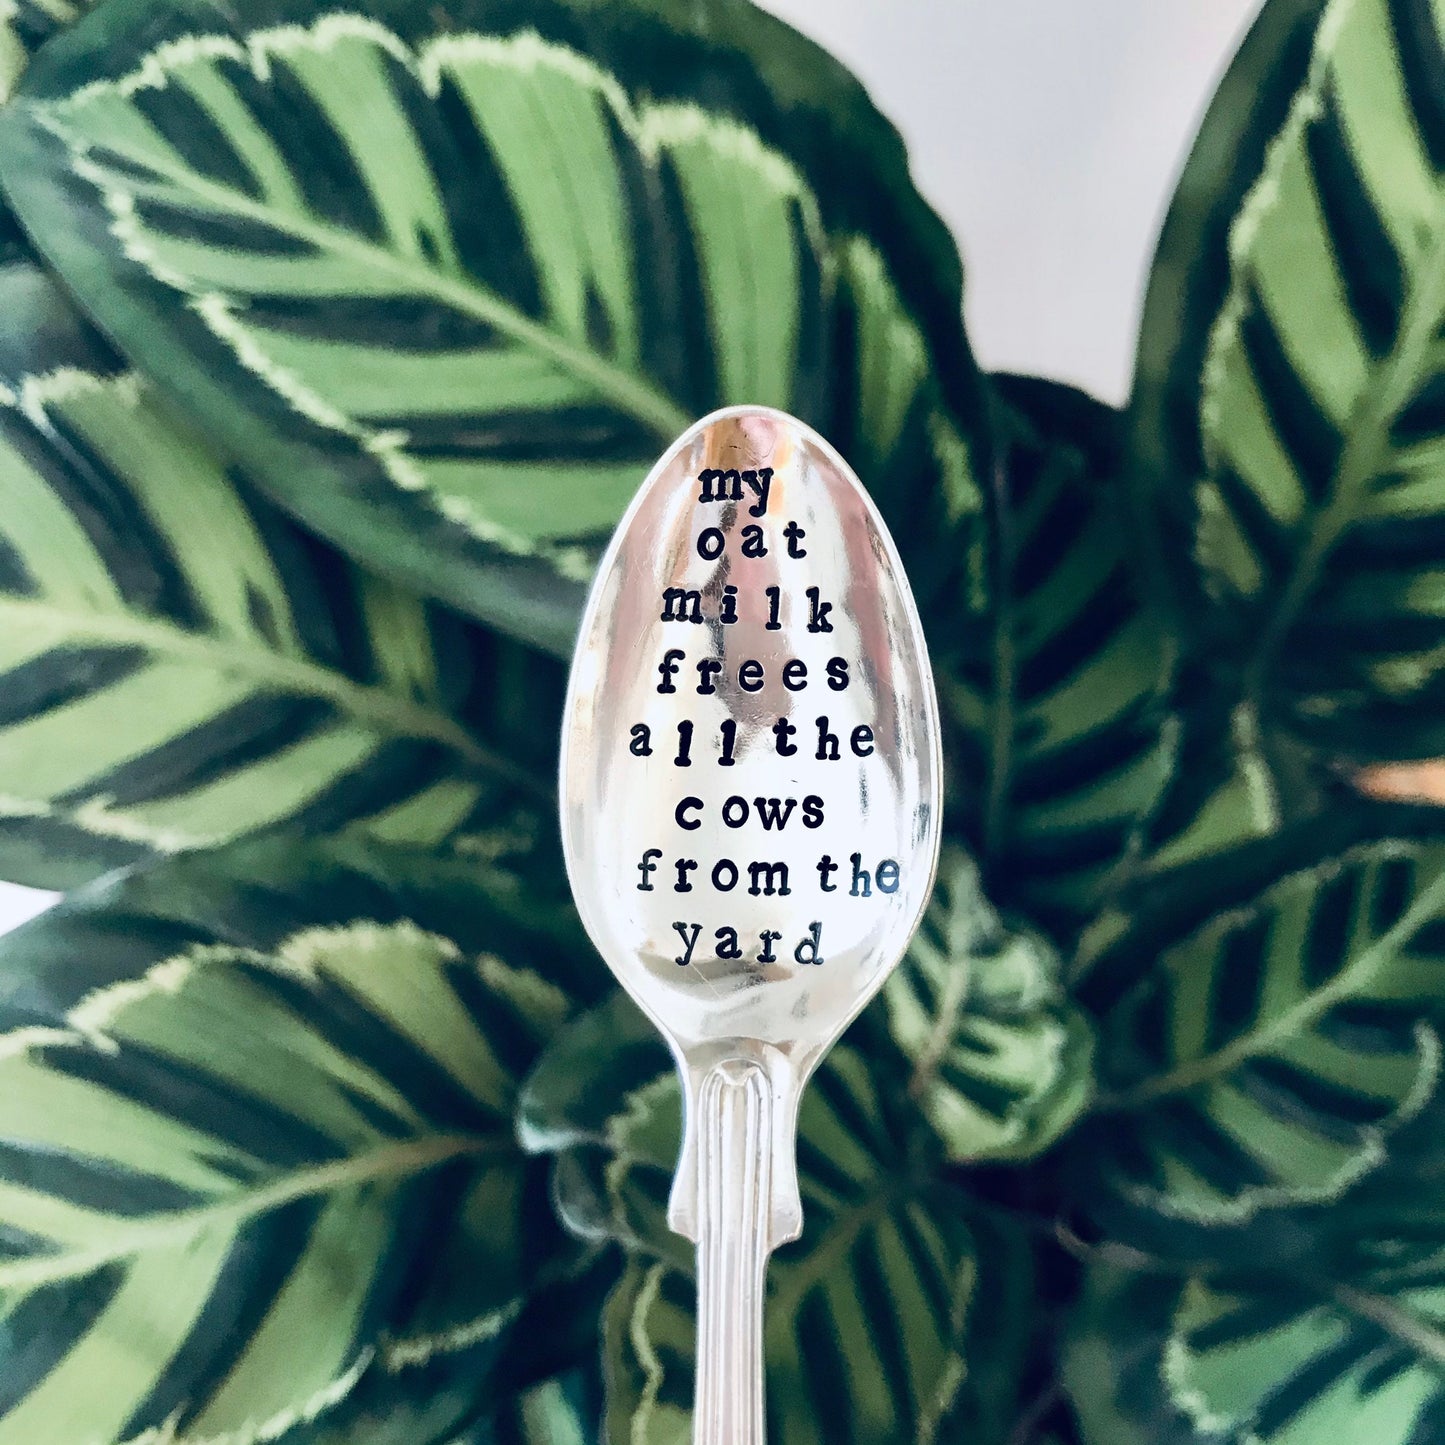 My Oat Milk Frees all the Cows from the Yard - Vintage Teaspoon